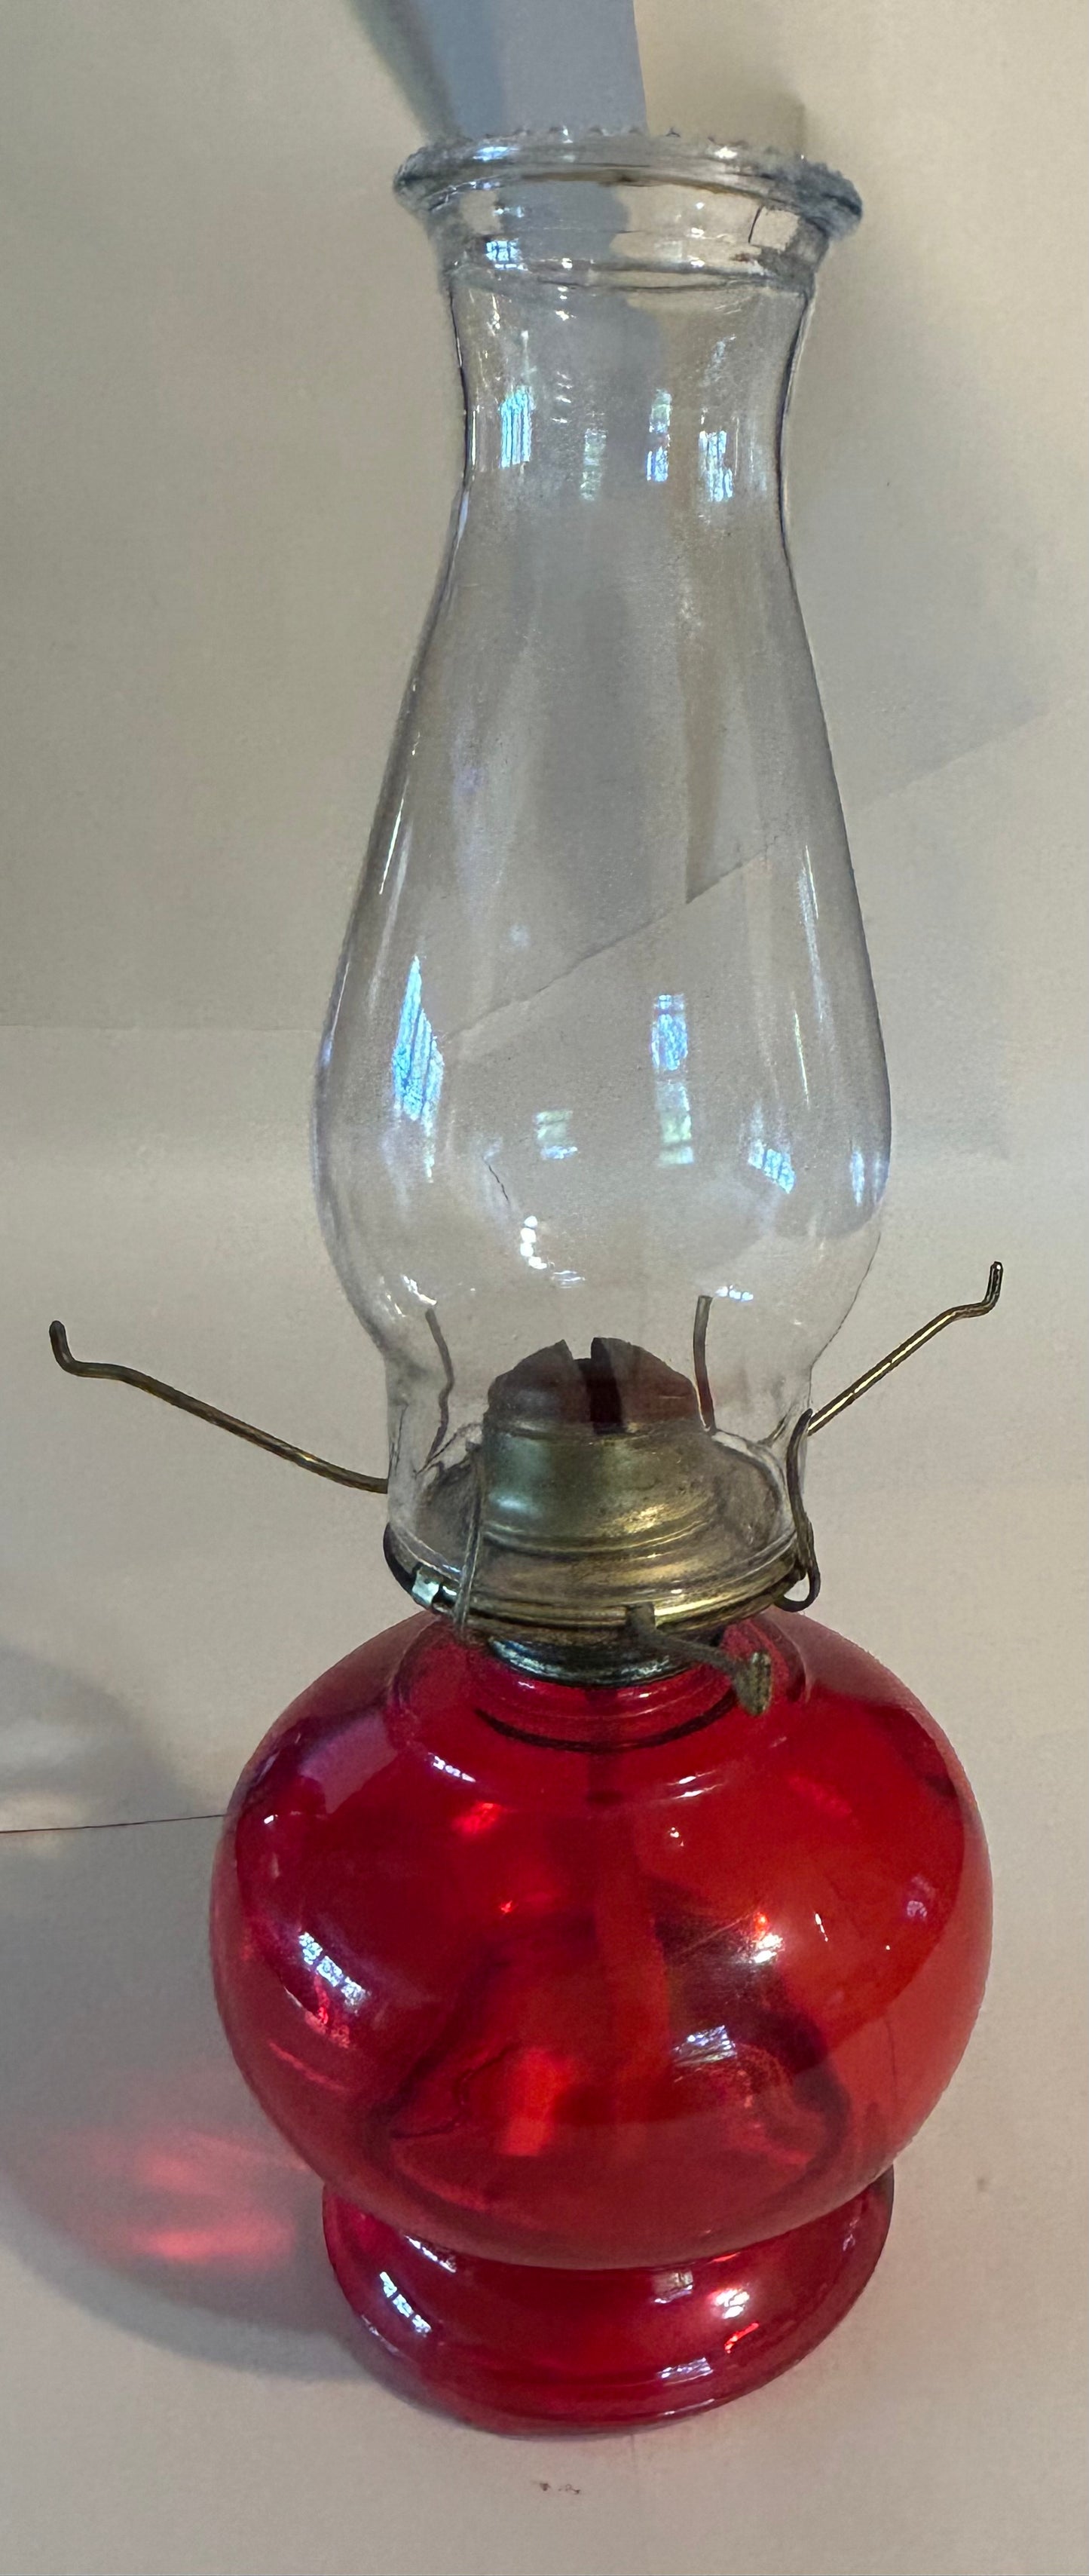 Vintage Antique Oil Lamp 14.5” High Red Glass Base & Clear Glass Globe